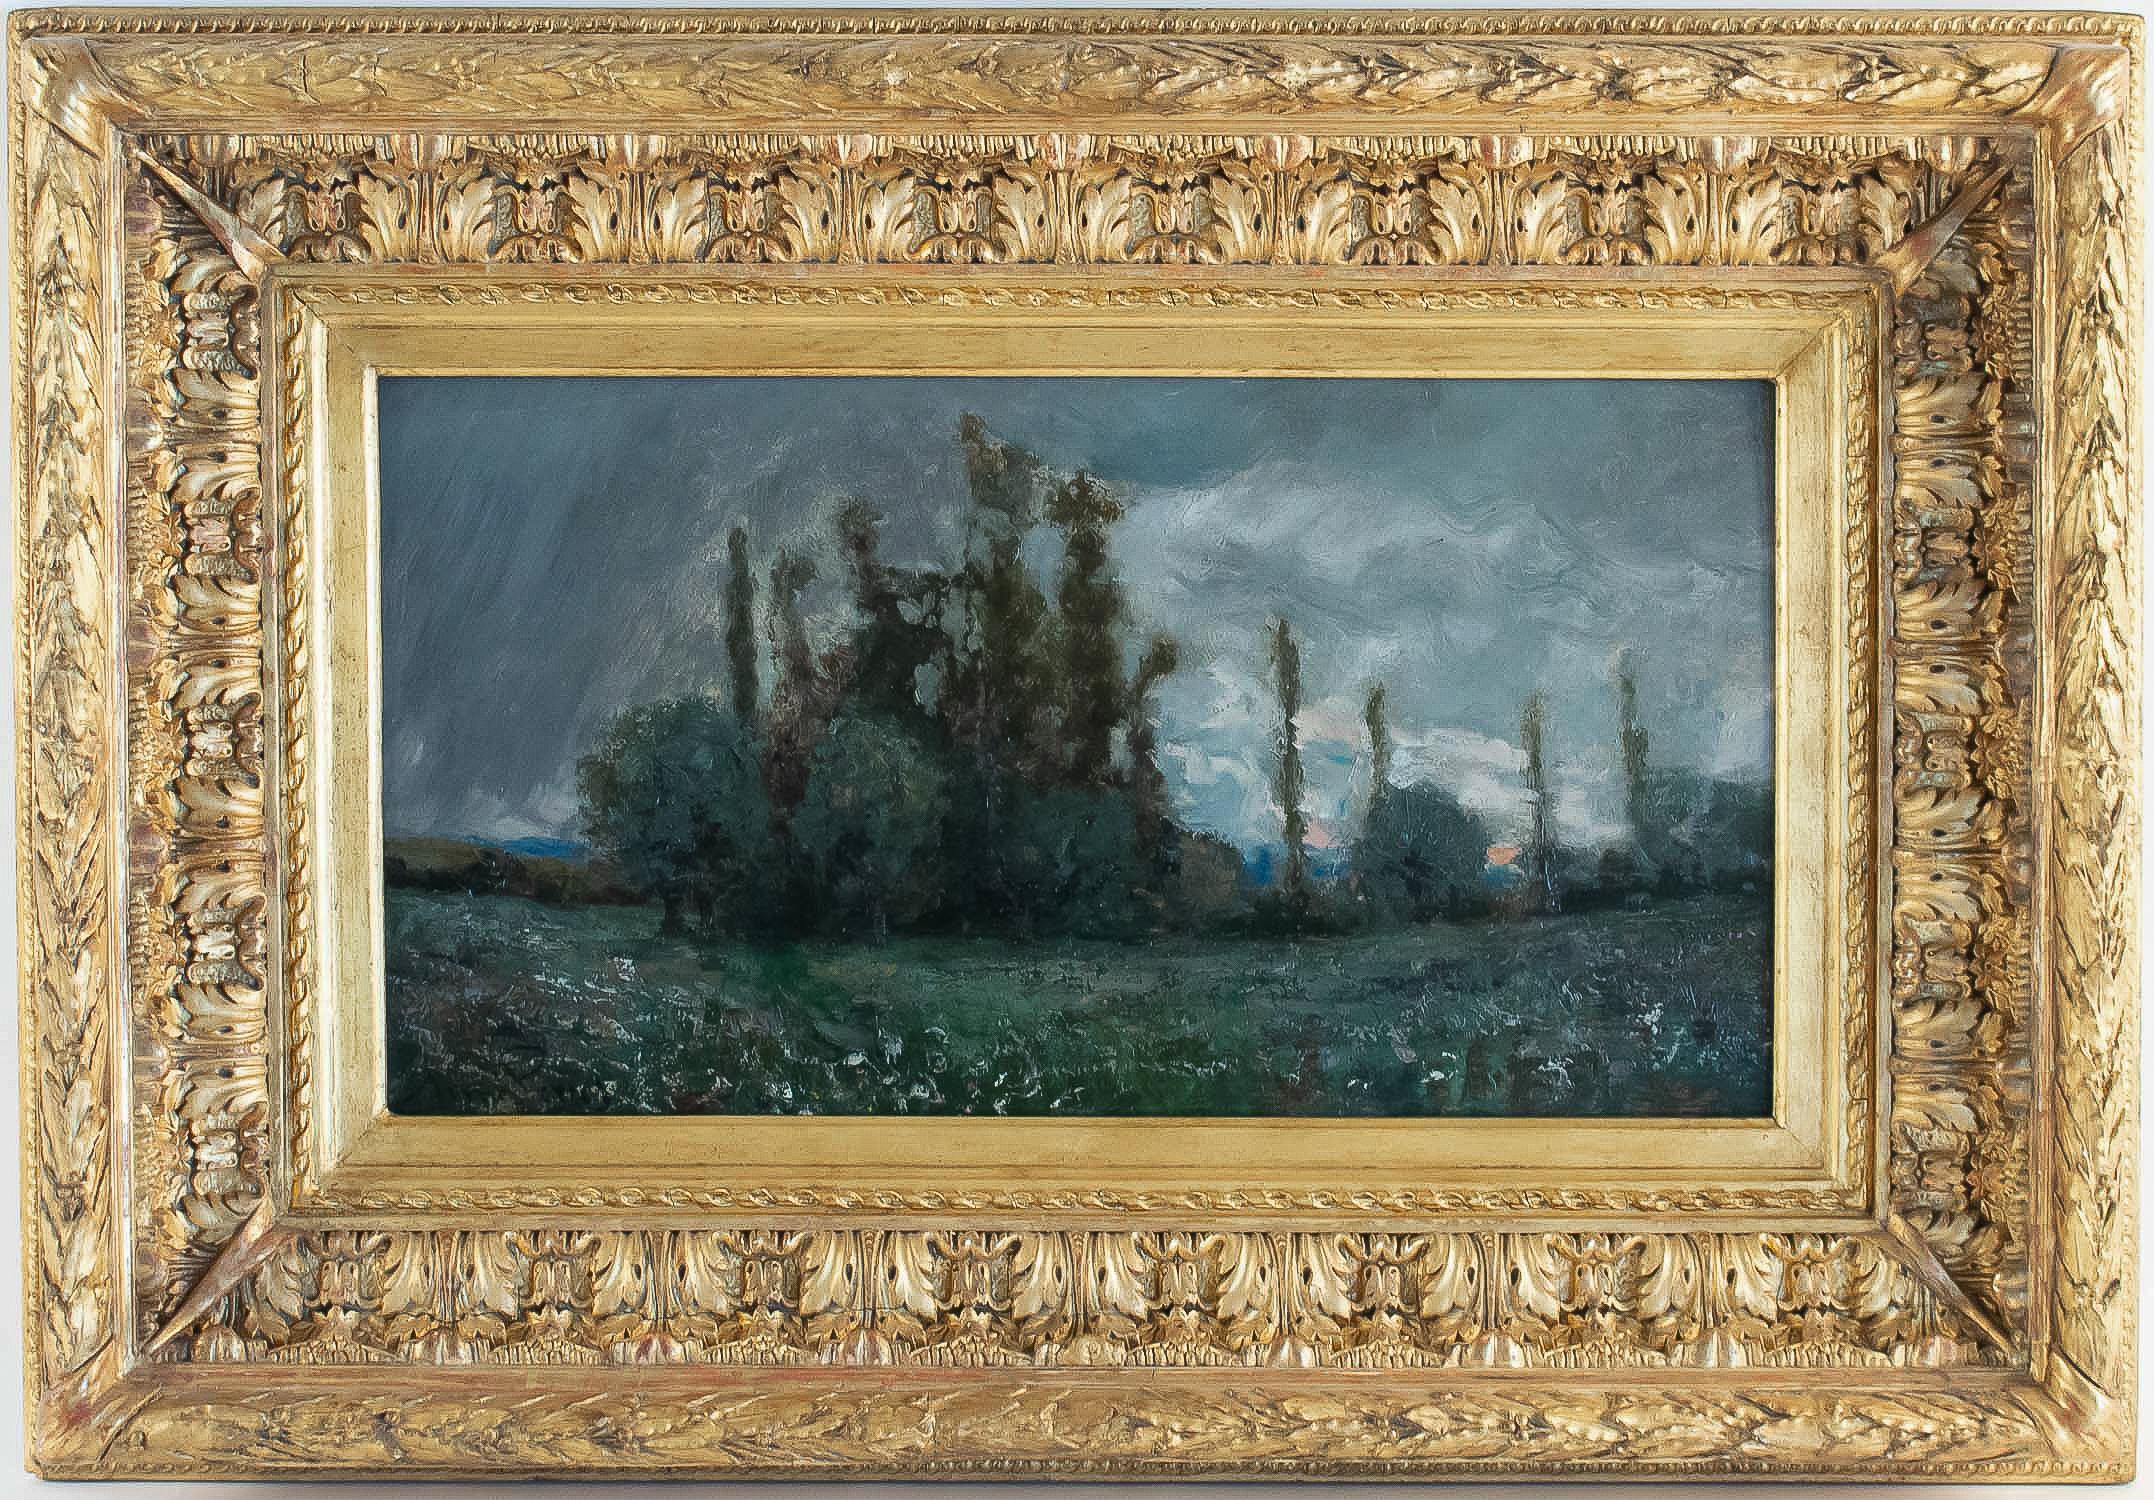 An excellent Lyon School painting signed on a lower left by Aimé Perret, depicting an exciting and ornamental Autumn sunset, with beautiful use of the blue color.
Our painting in an excellent condition served by its original magnificent hand-carved